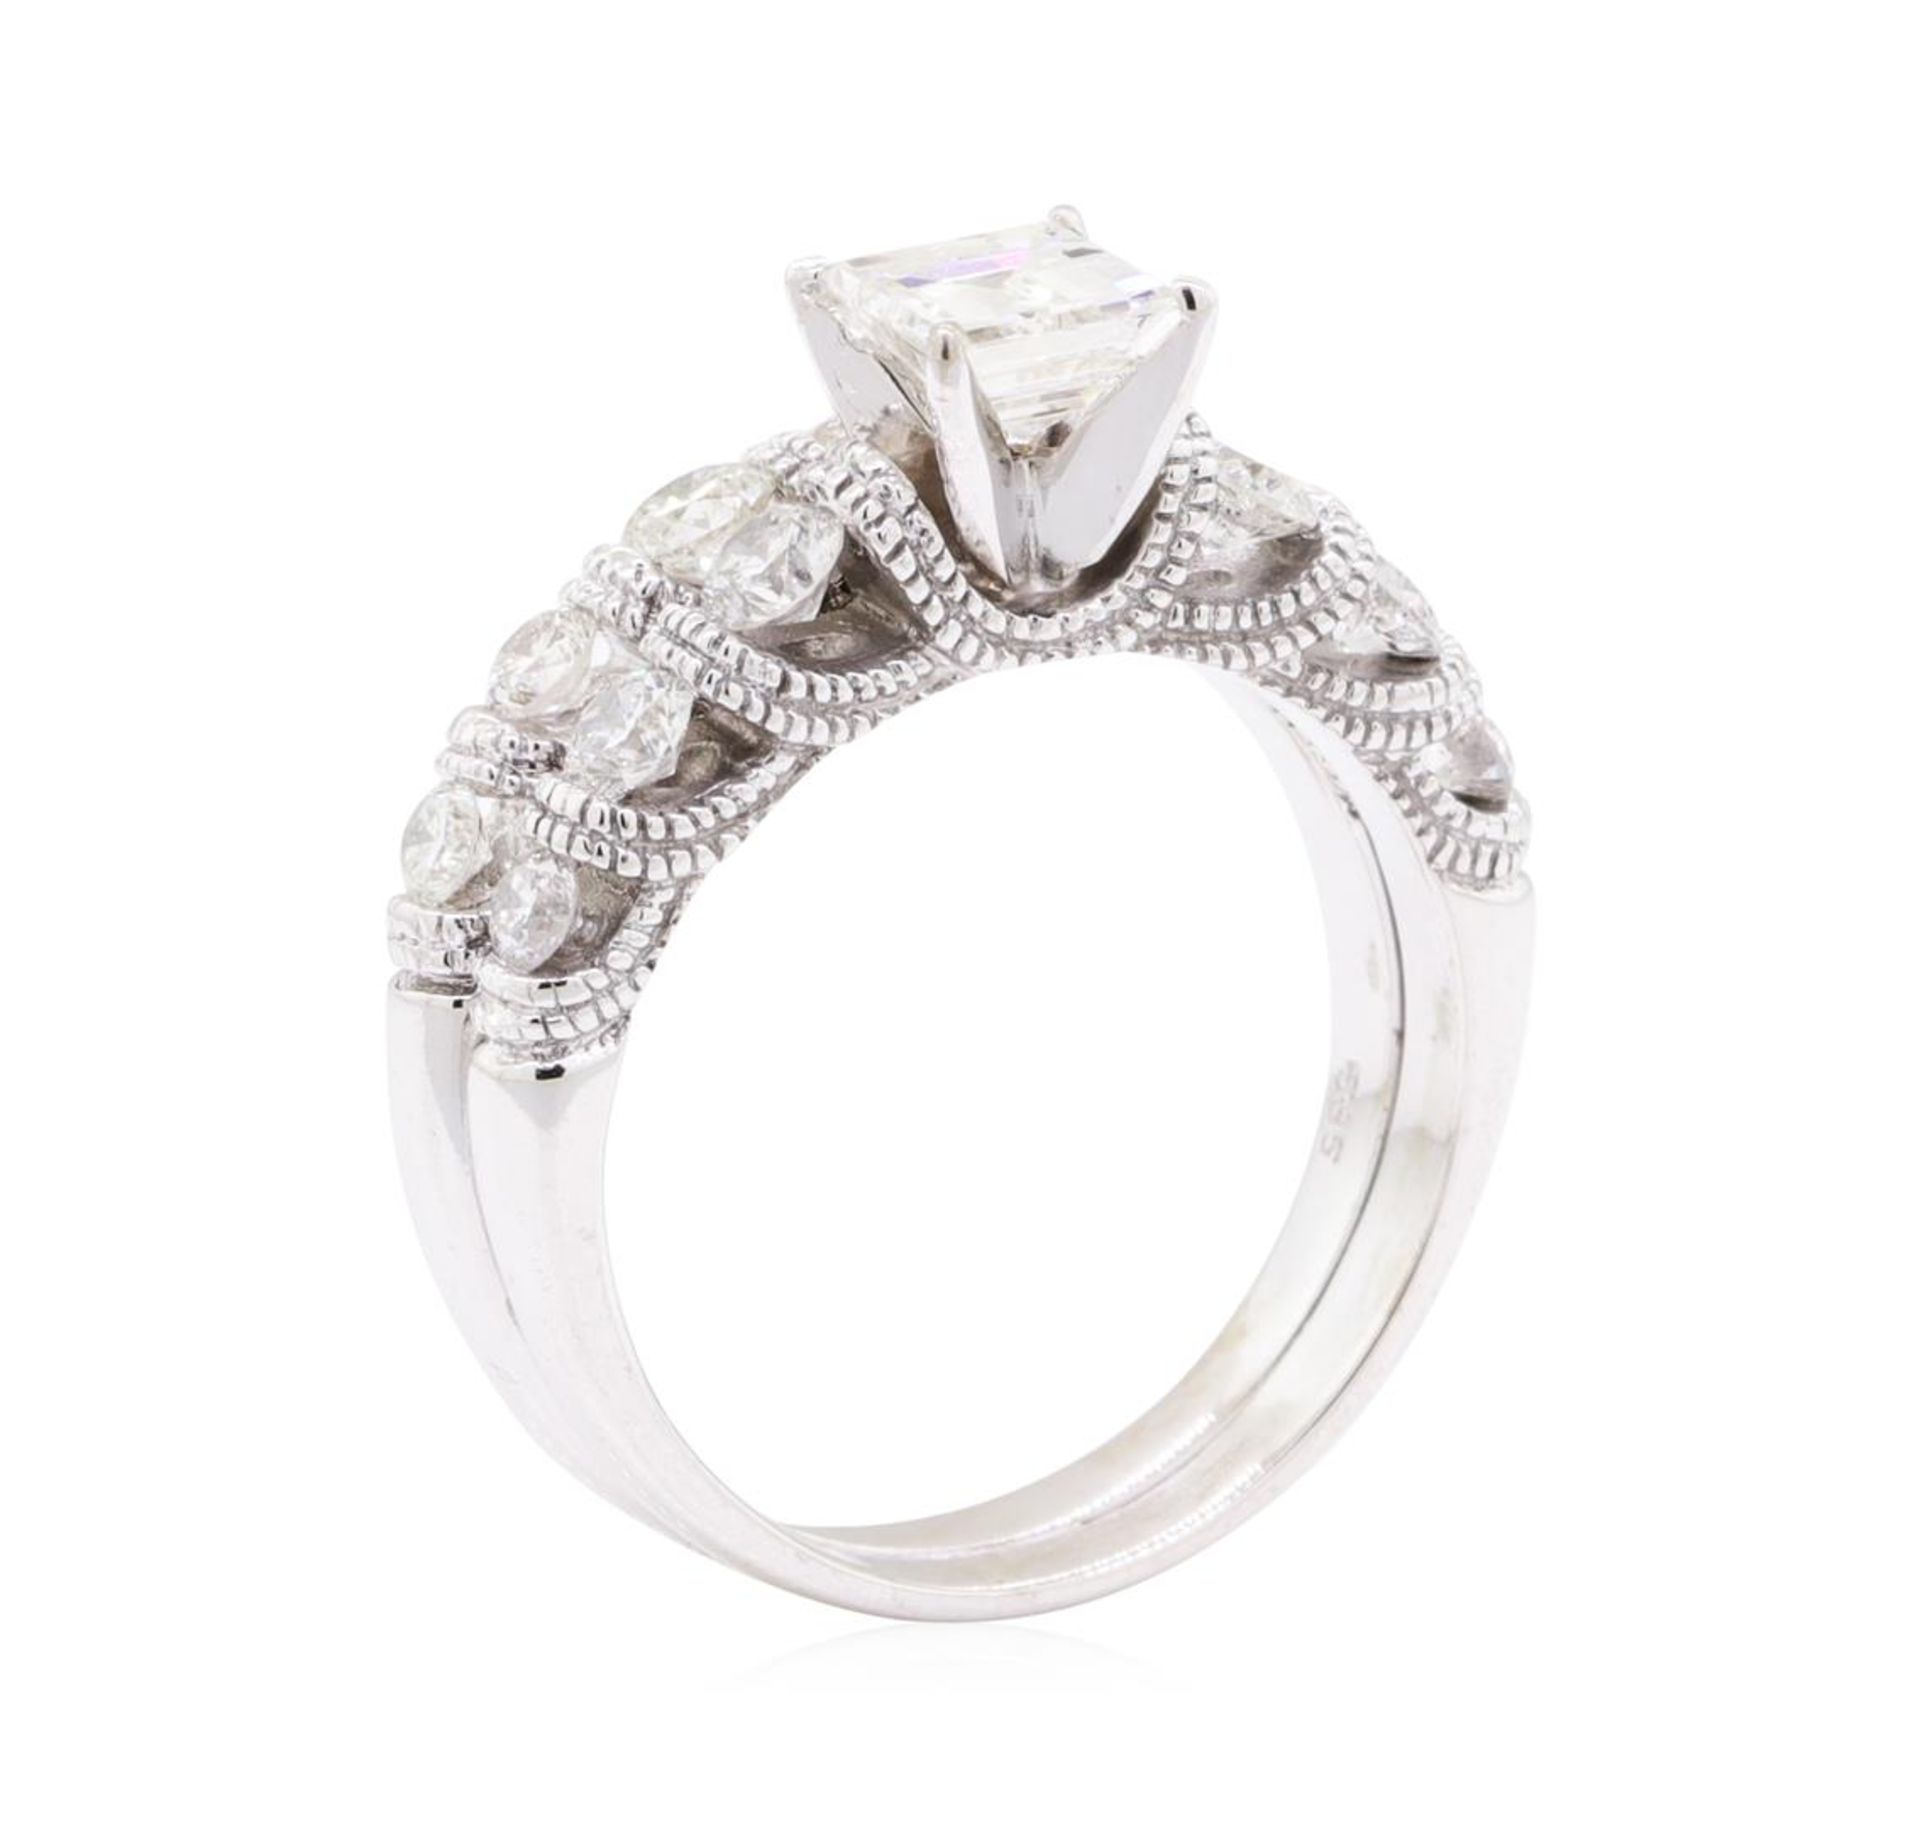 1.68 ctw Diamond Ring And Attached Band - 14KT White Gold - Image 4 of 5